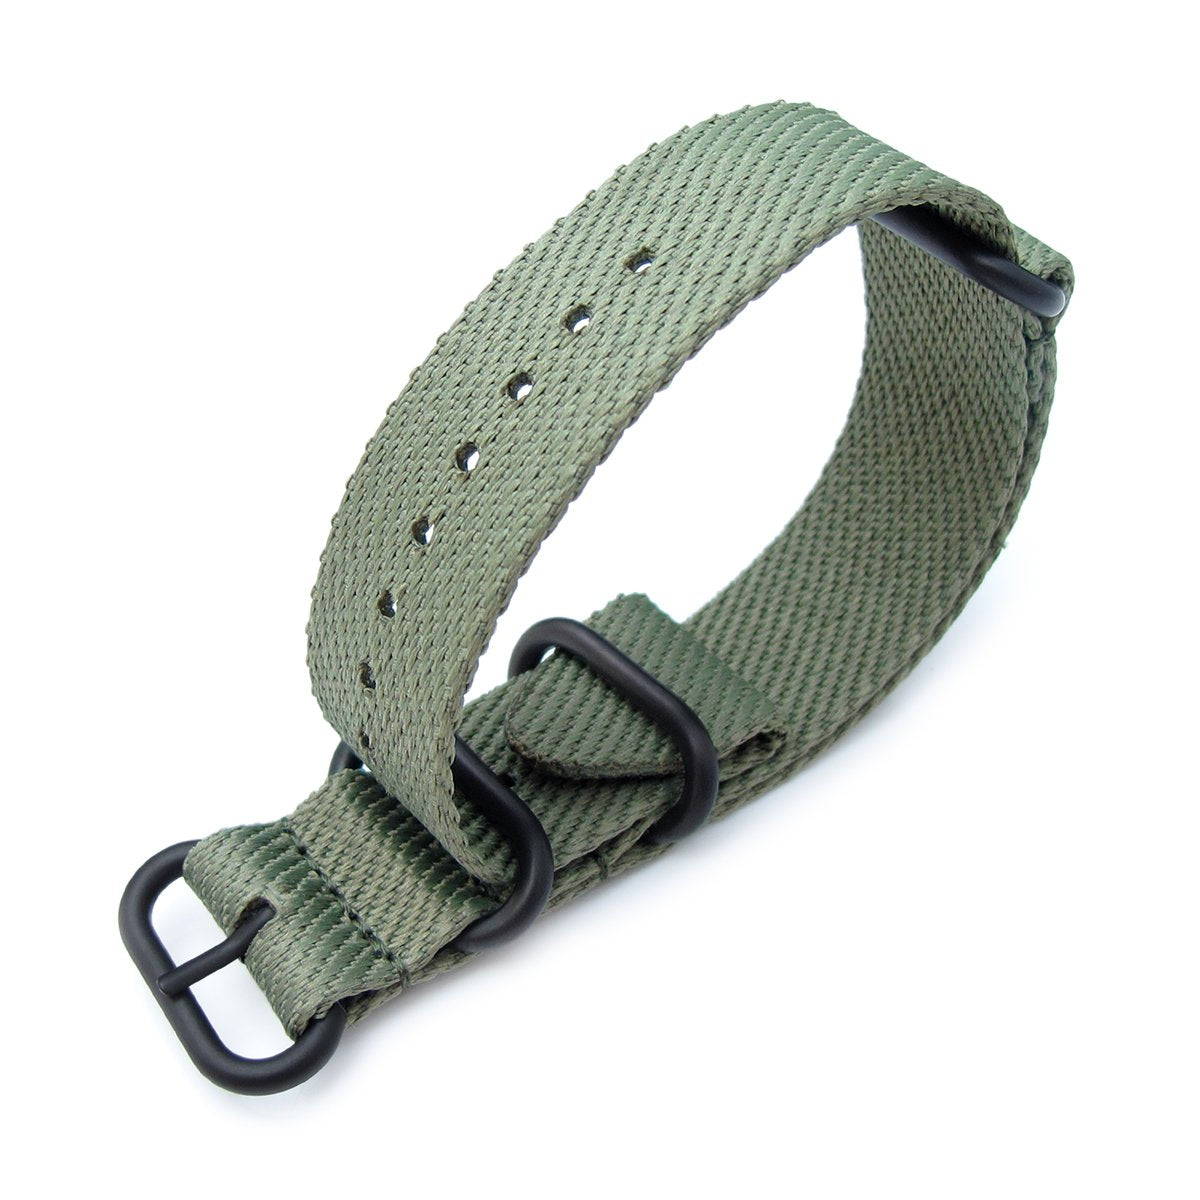 MiLTAT 22mm G10 Military Waffle ZULU Watch Strap Nylon Armband PVD Military Green Strapcode Watch Bands